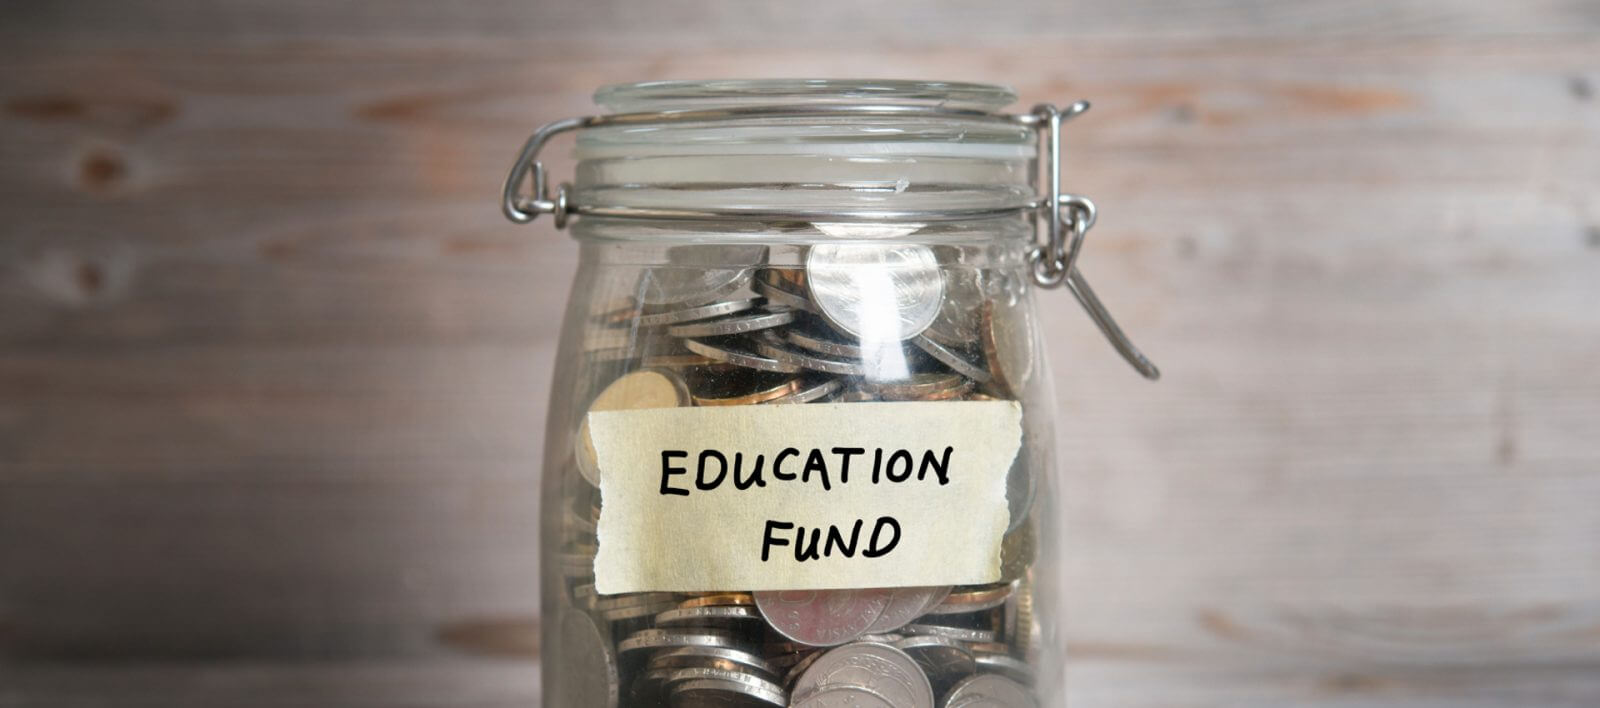 Image Tips On How To Prepare Education FUNDS For Your Beloved Children